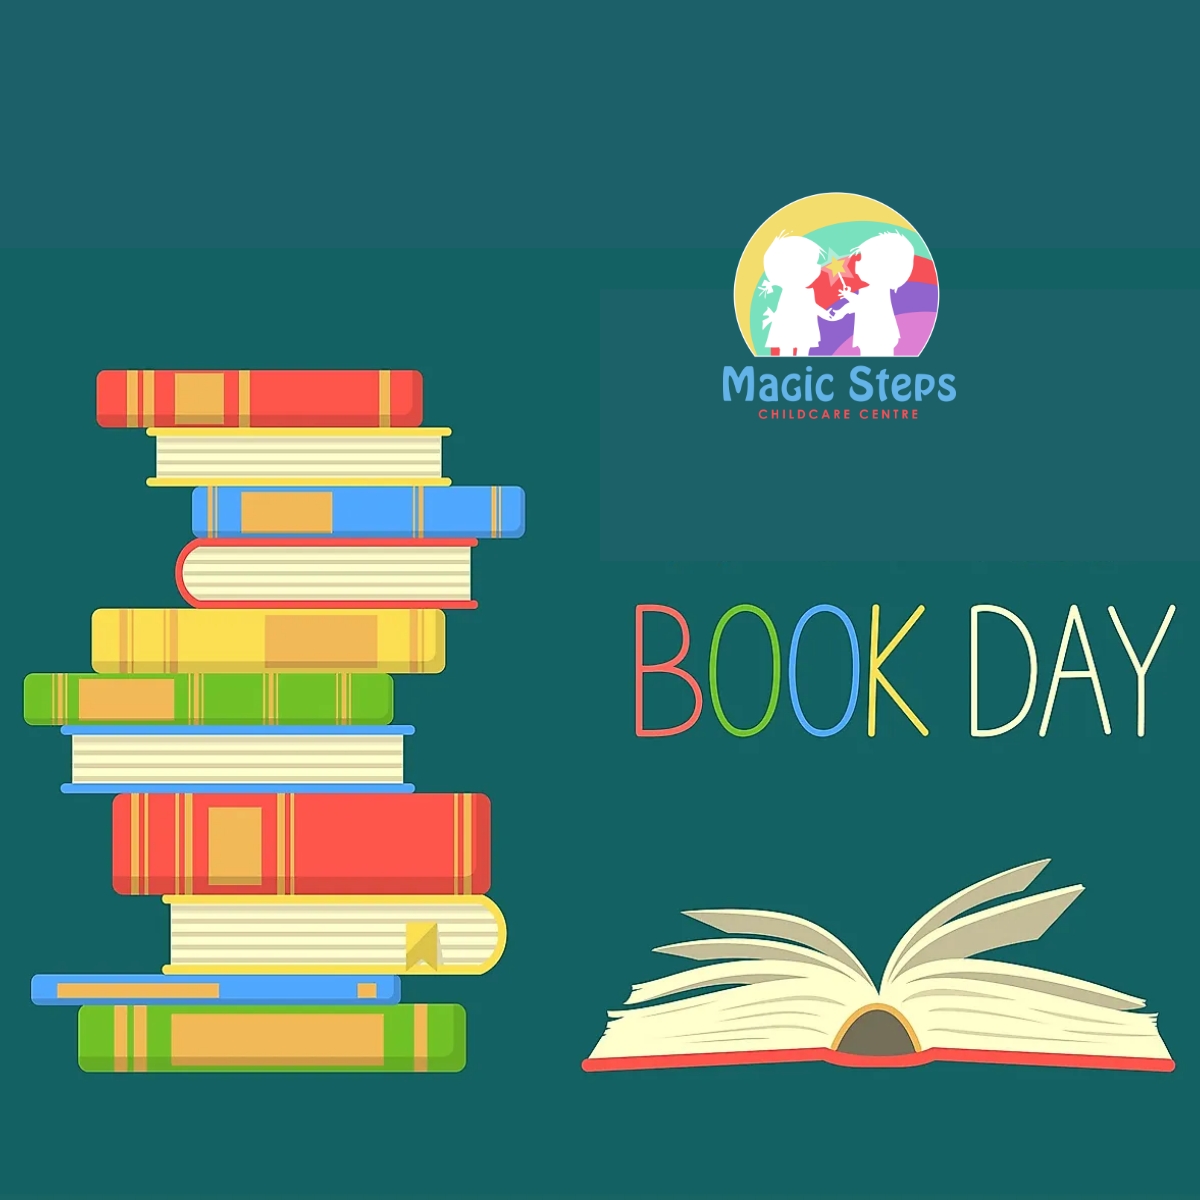 Book Day- Monday 9th August